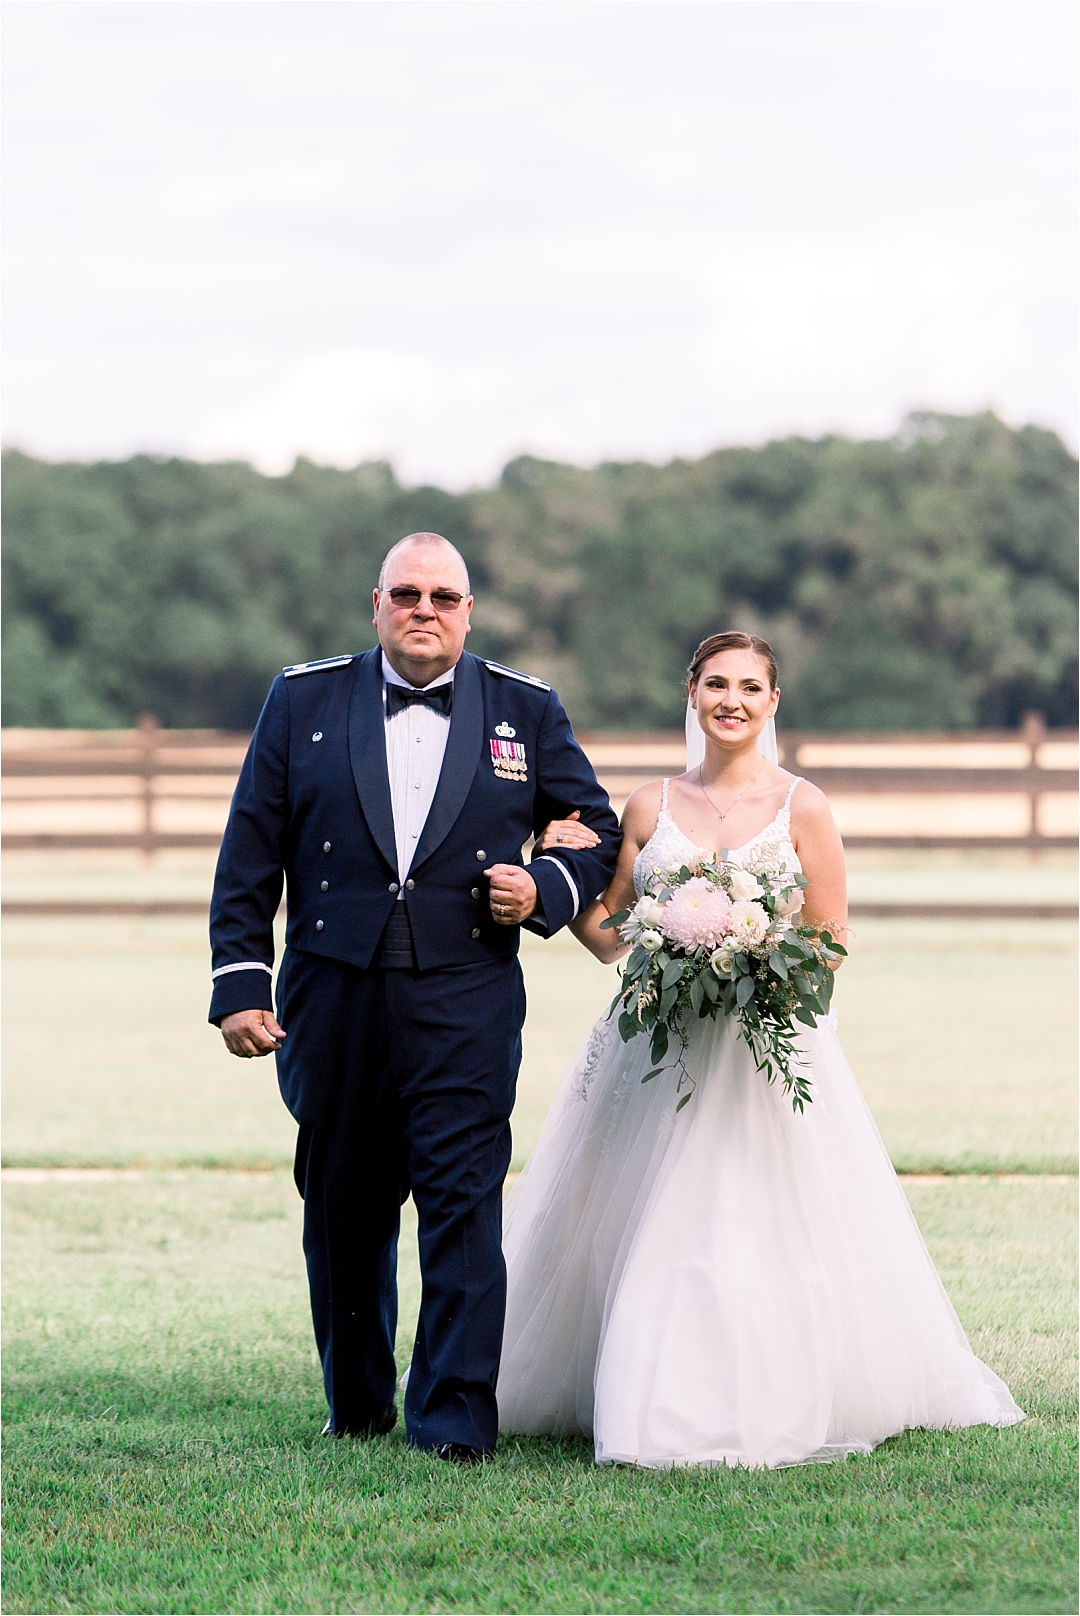  bride walking down aisle with dad_Photos by Leigh Wolfe, Atlanta's Top Wedding Photographer